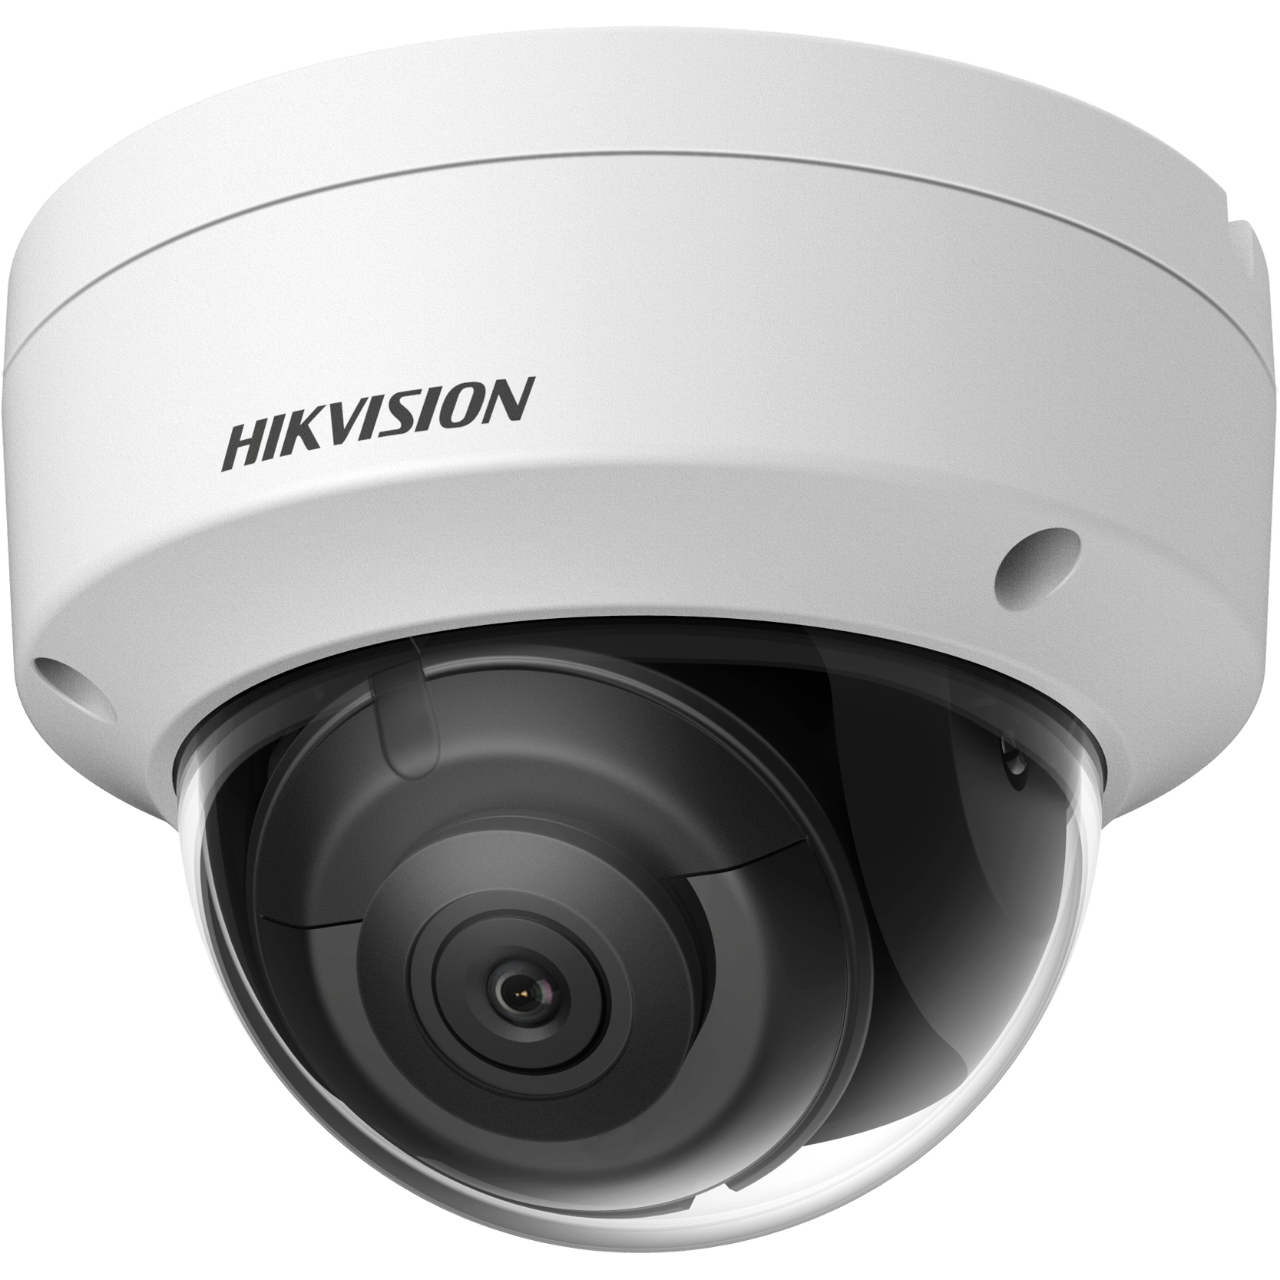 20000567 Hikvision Pro Series EasyIP 2.0+ Gen2 4MP WDR Mini IR Dome IP Camera, 2.8mm